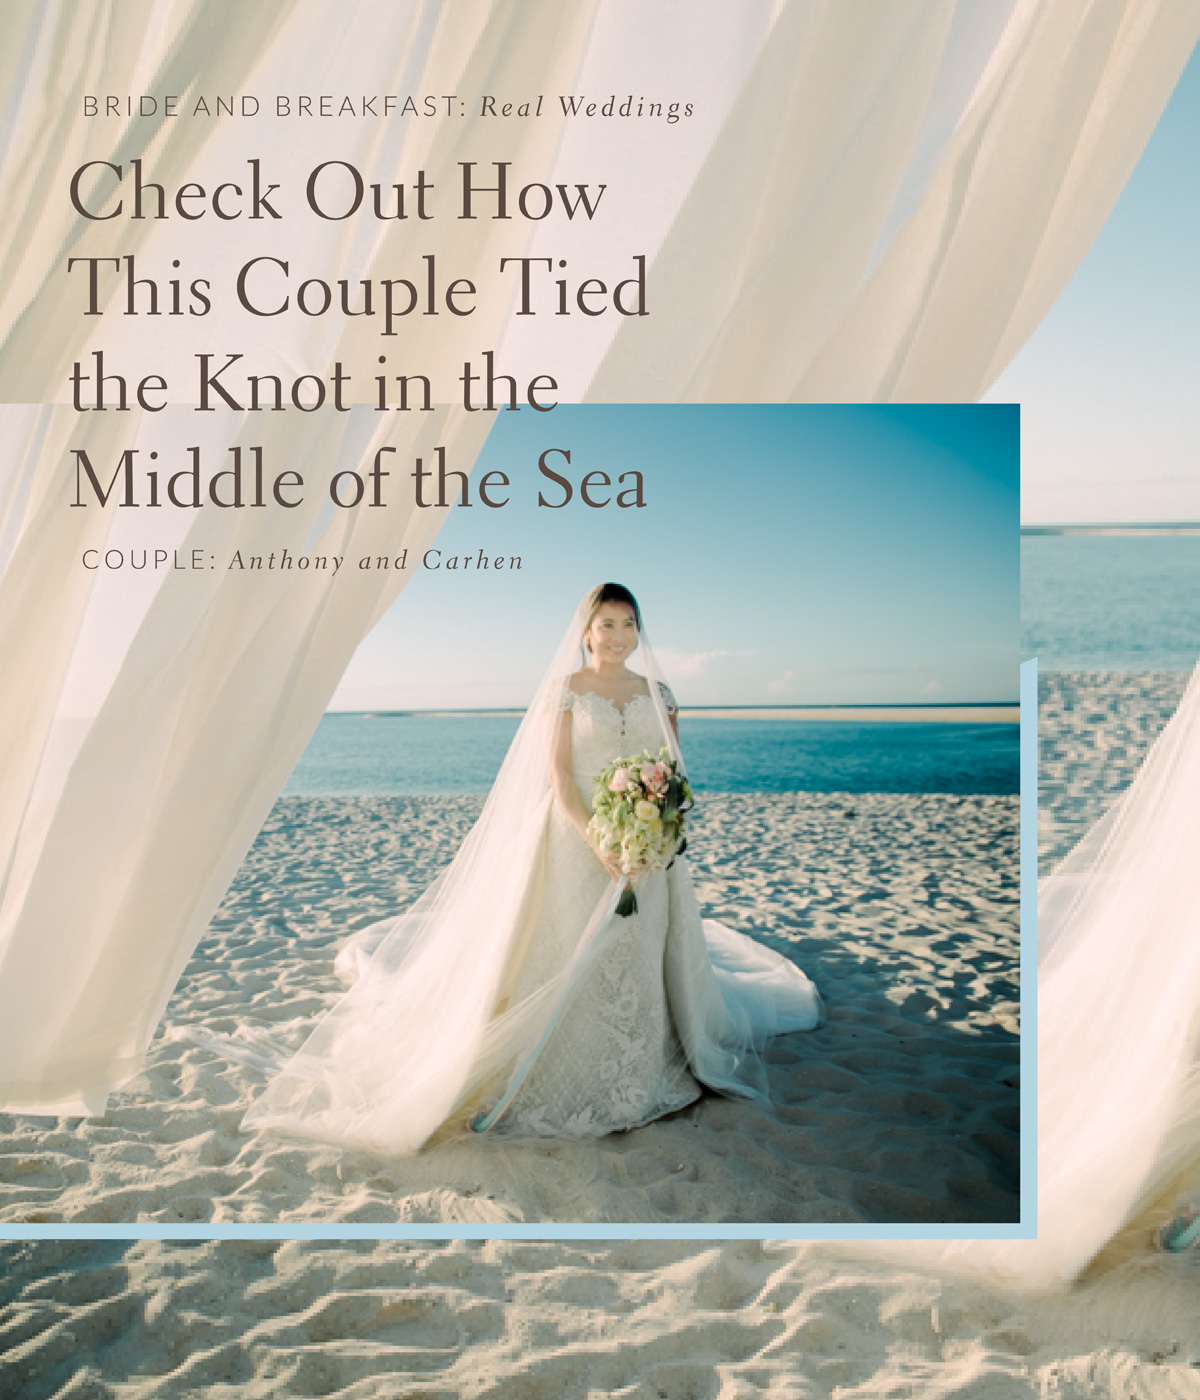 Check Out How This Couple Tied the Knot in the Middle of the Sea!